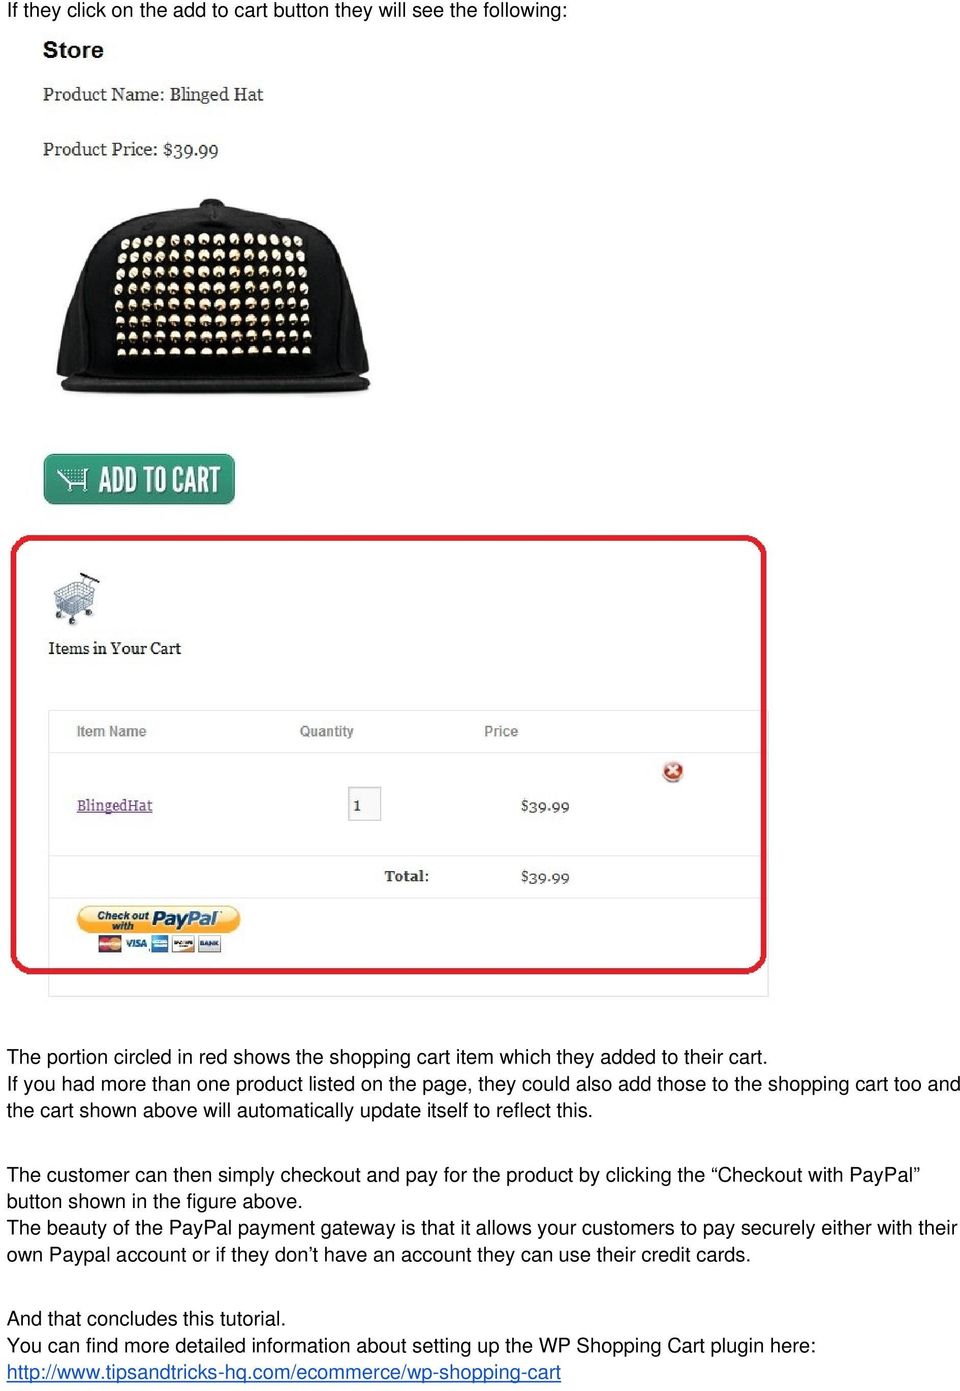 The customer can then simply checkout and pay for the product by clicking the Checkout with PayPal button shown in the figure above.